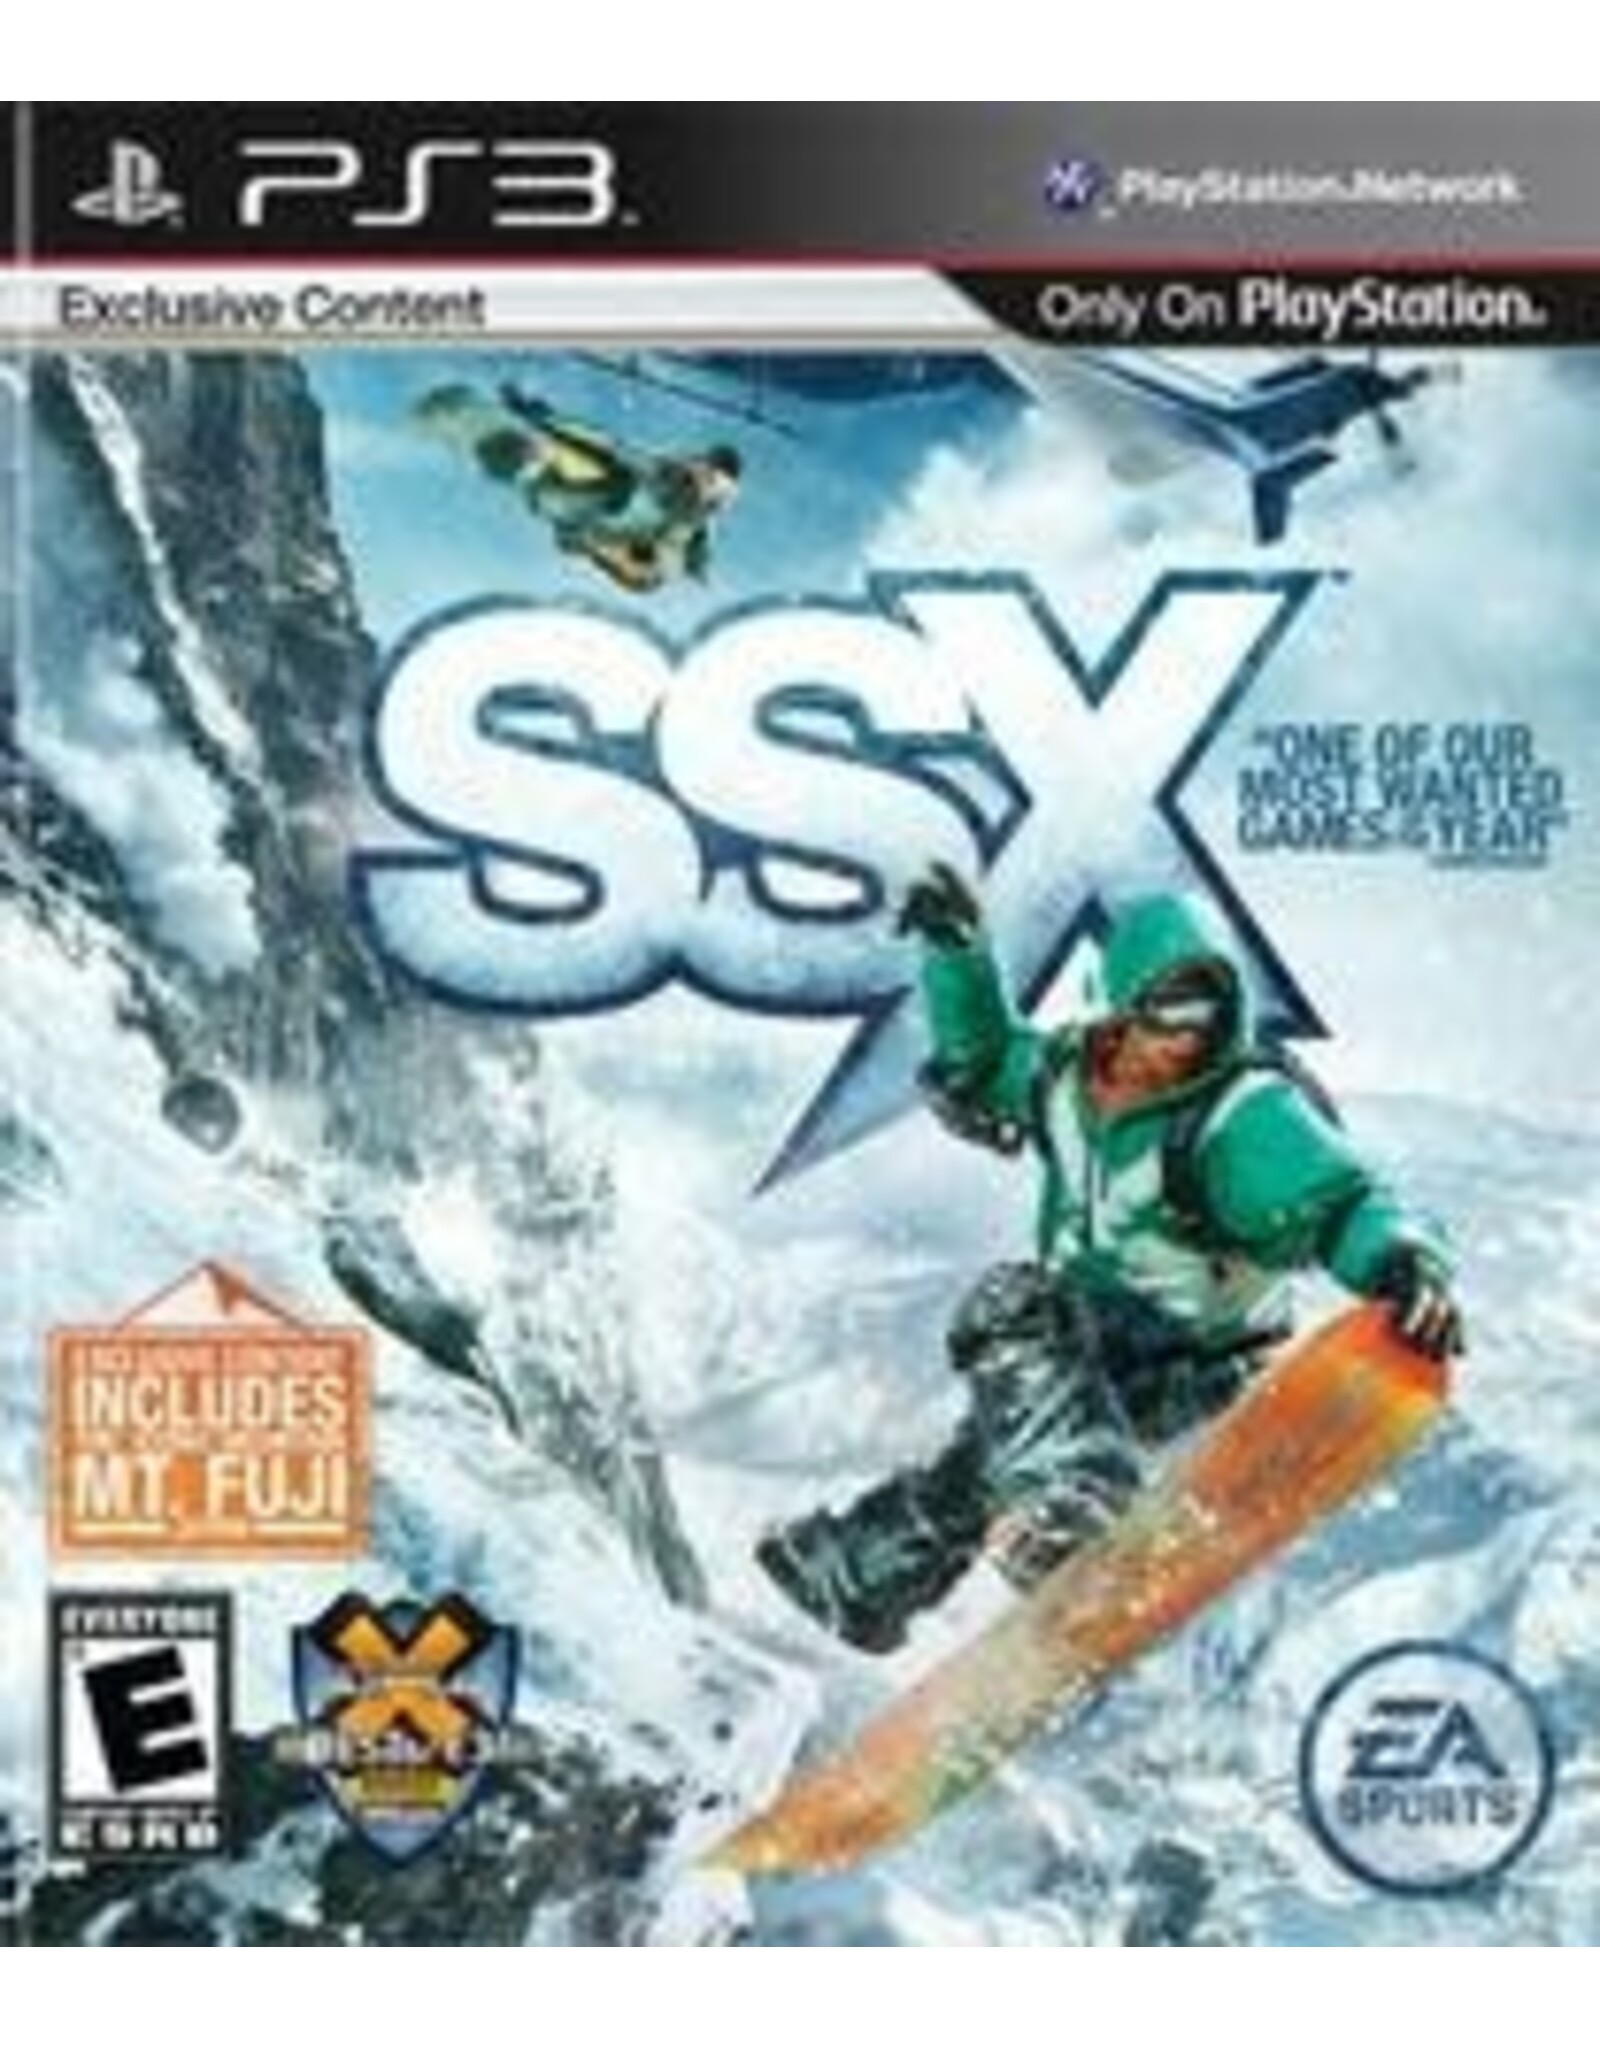 Playstation 3 SSX (Used)